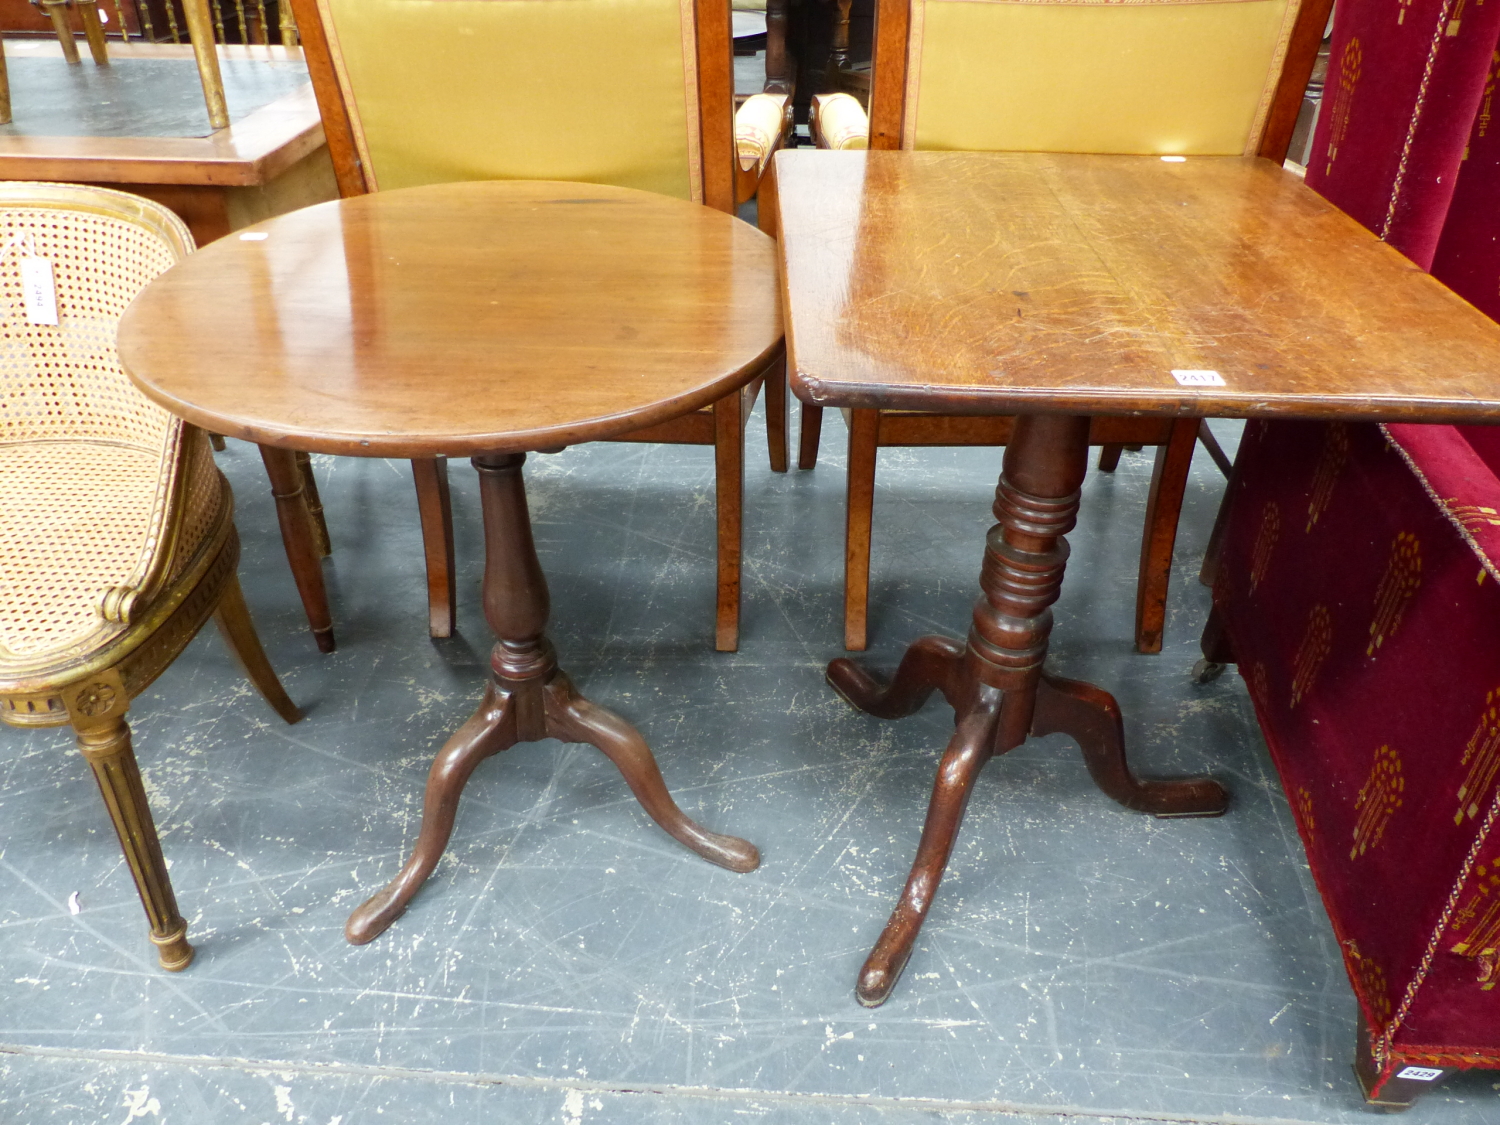 AN EARLY 19th.C.MAHOGANY BIRDCAGE TILT TOP TRIPOD TABLE. Dia.61cms TOGETHER WITH A SIMILAR PERIOD